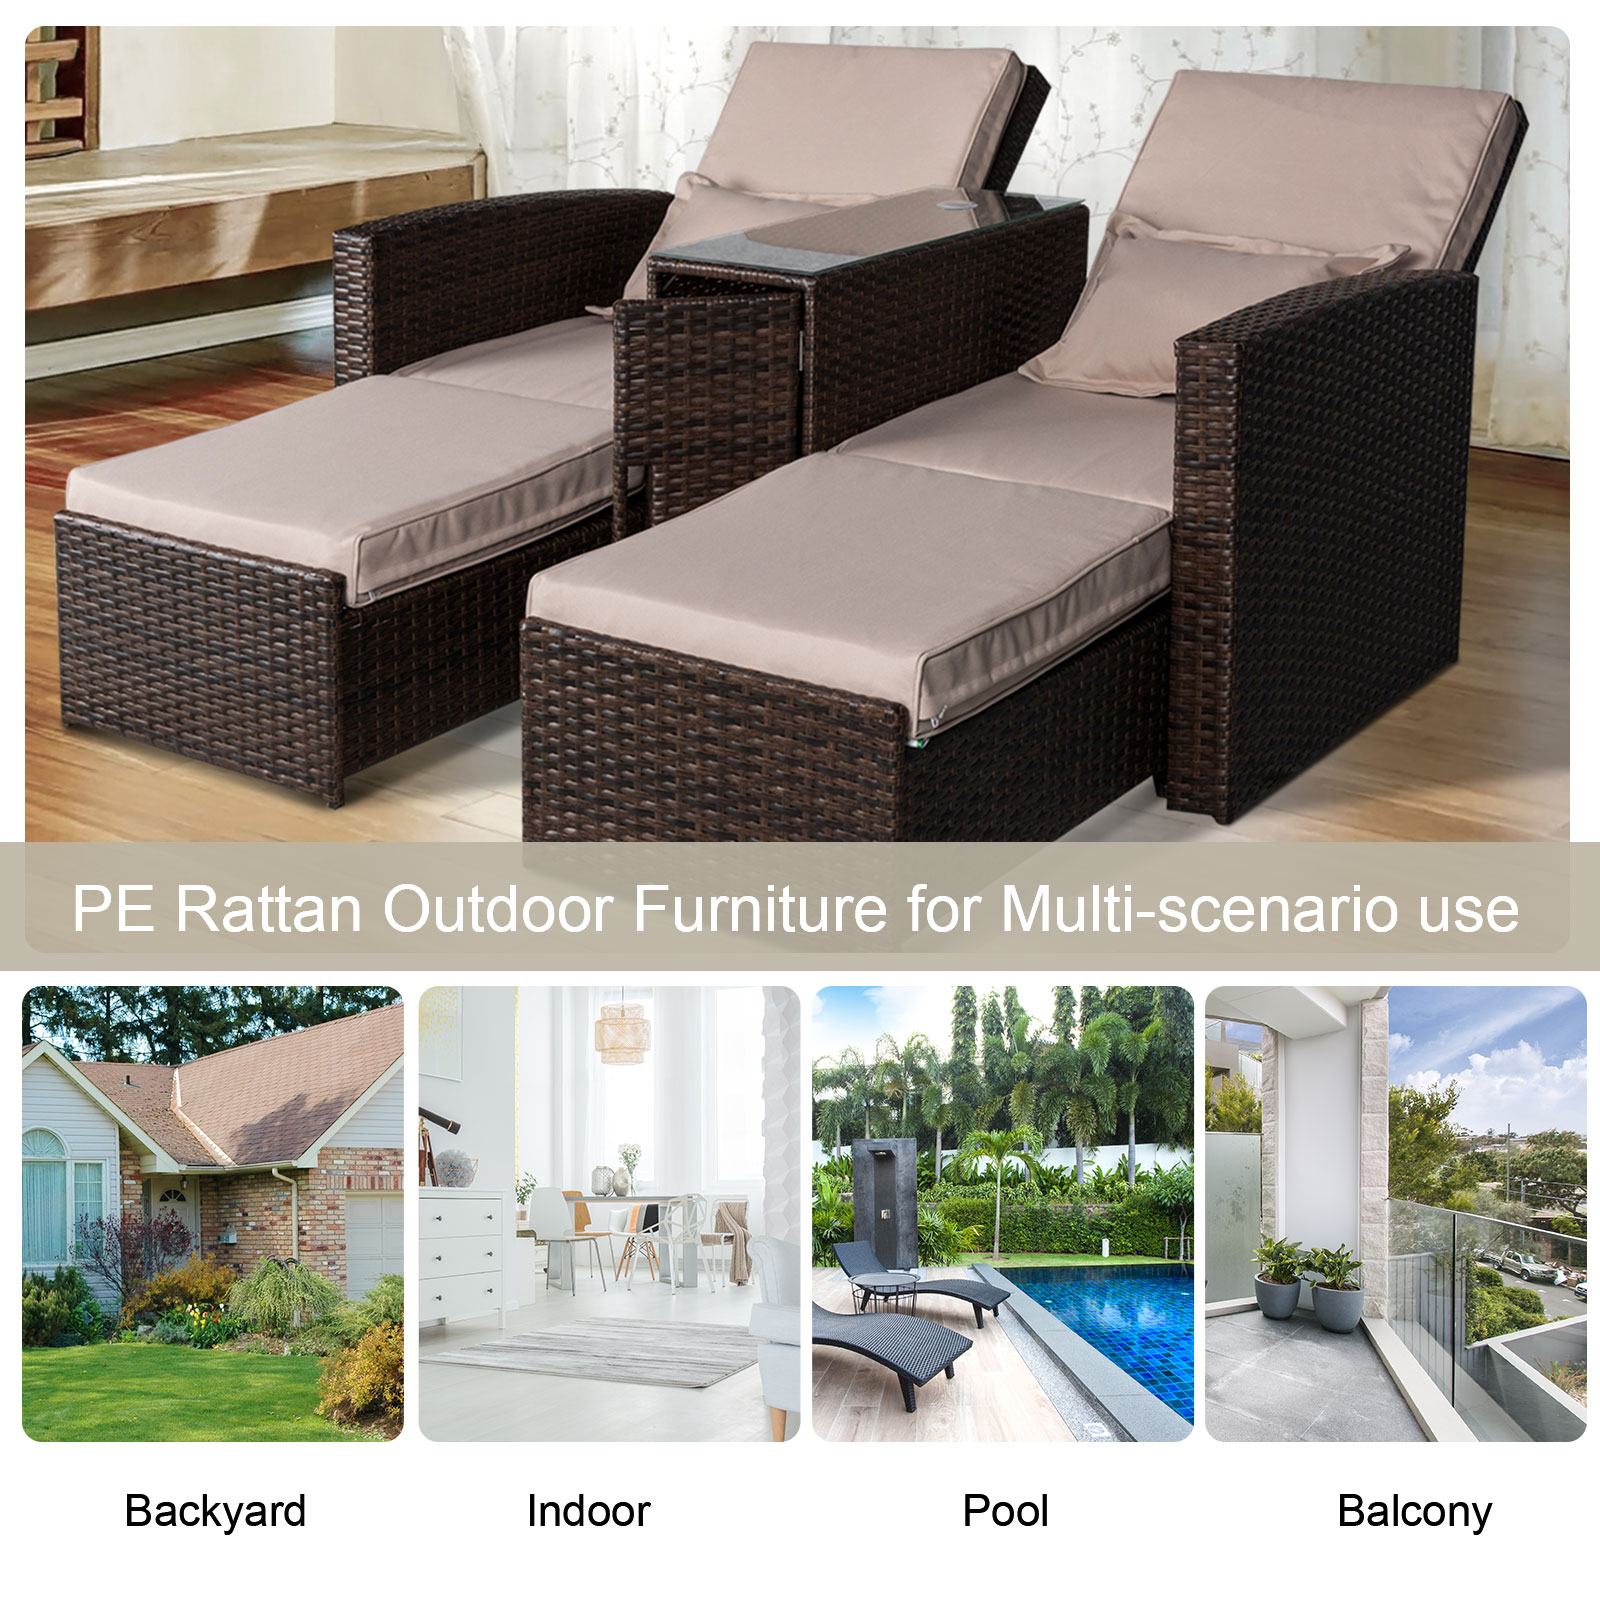 Outsunny Outdoor Adjustable Garden Rattan Companion Sofa Chair & Stool Lounger Recliner Love Sunbed Daybed Patio Wicker Weave Furniture Set Already Assembled with Umbrella Hole Brown